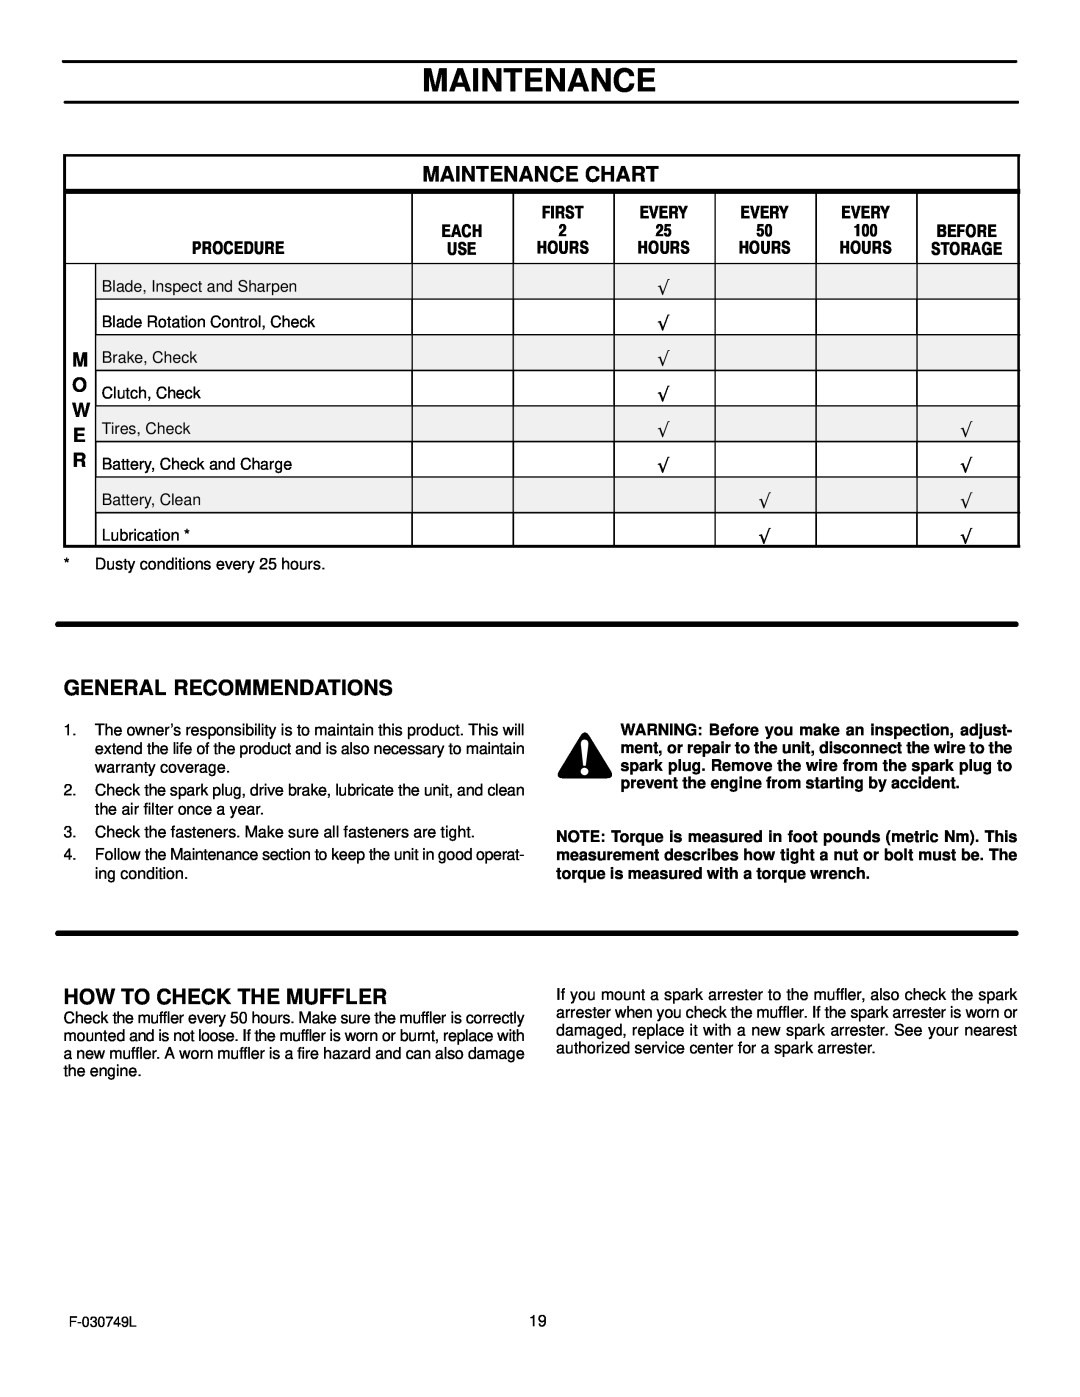 Murray 405030x48A manual Maintenance Chart, General Recommendations, How To Check The Muffler 